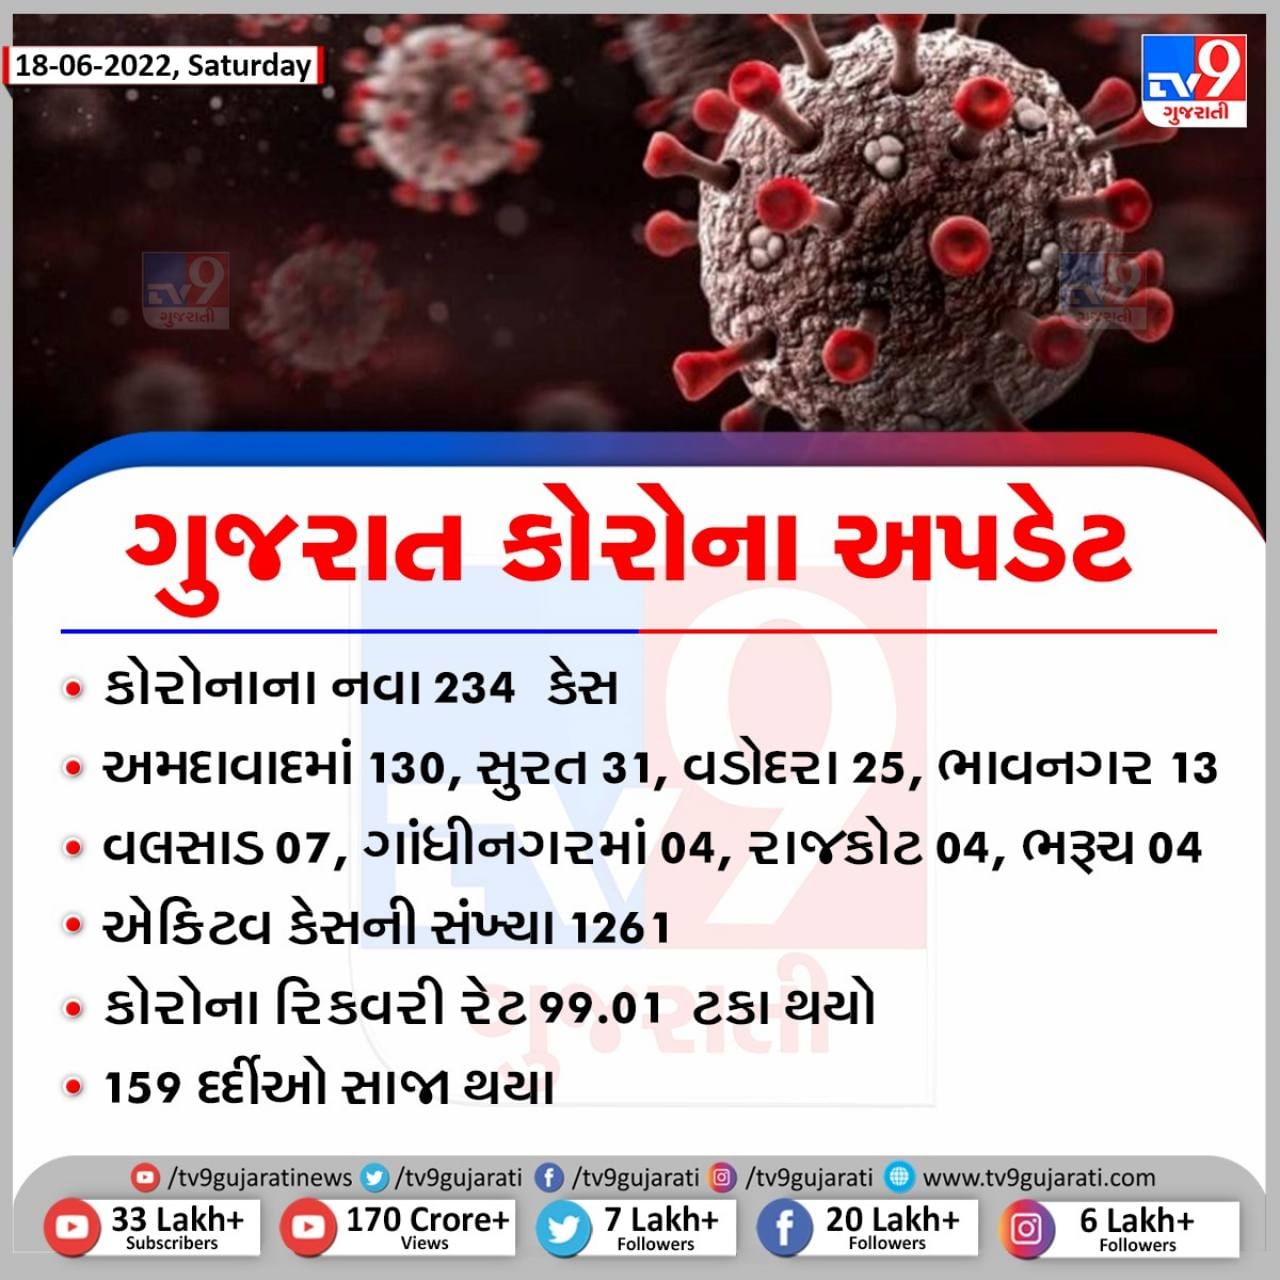 Corona cases continue to rise in Gujarat, 234 new cases reported, 1261 active cases